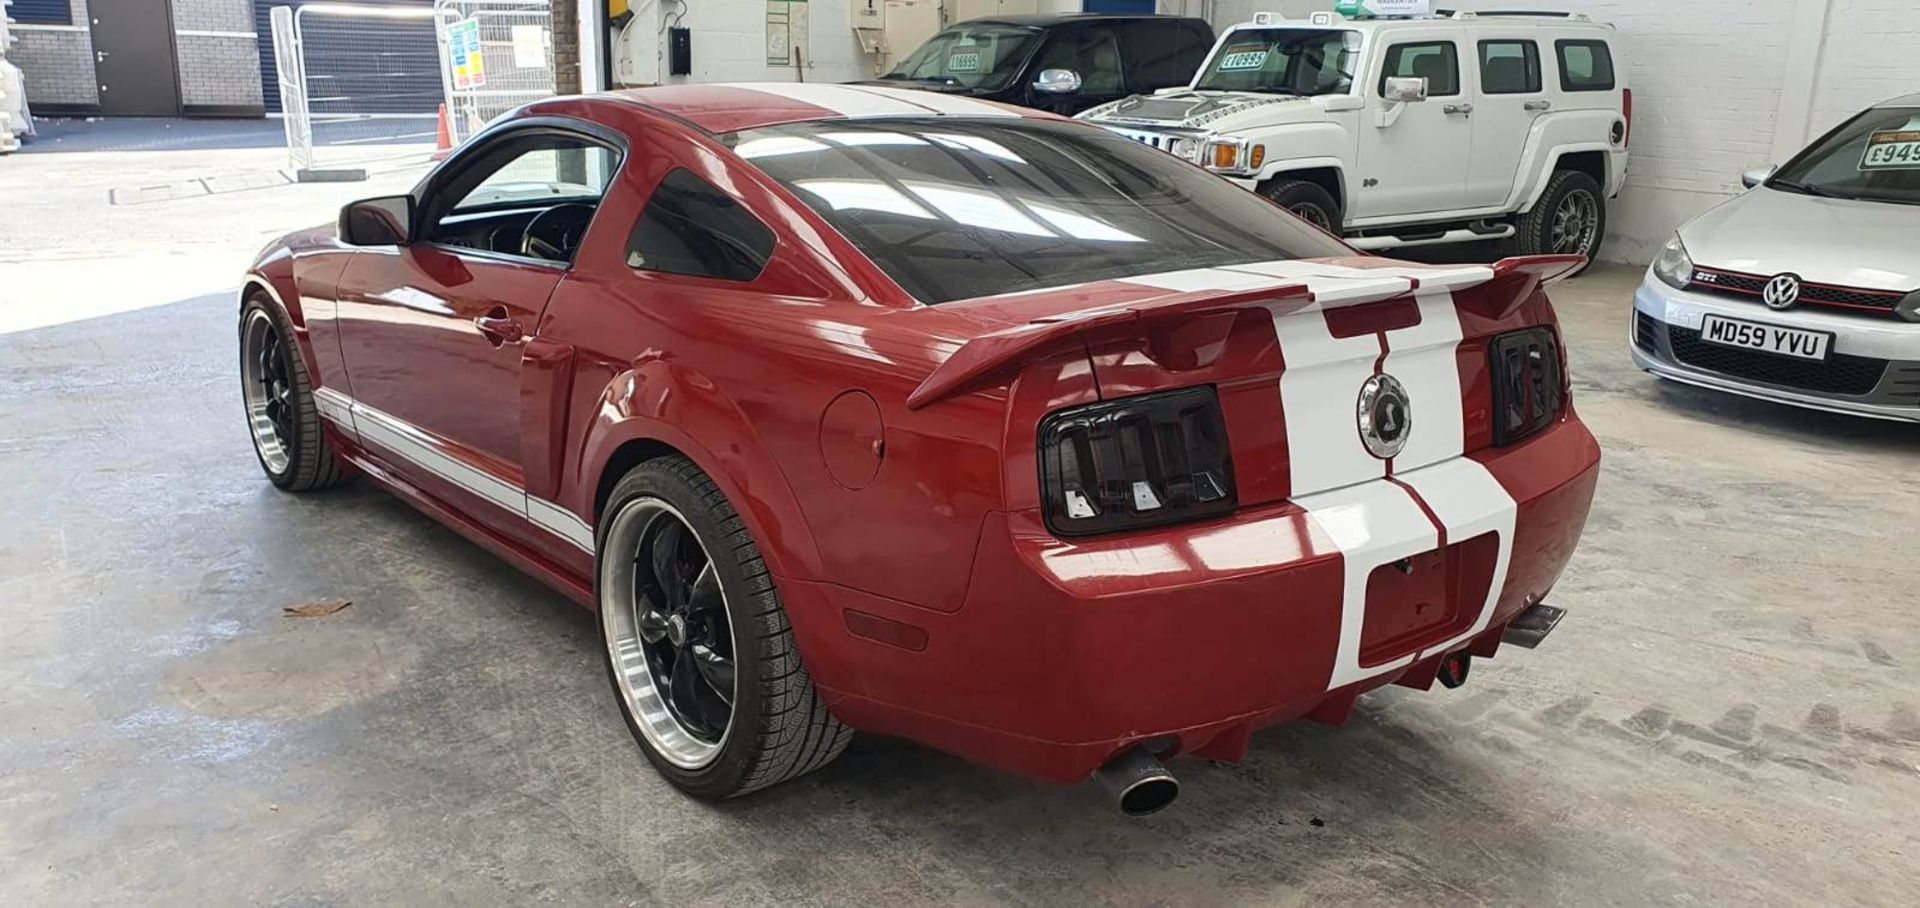 2008 FORD SHELBY MUSTANG GT500 RED / WHITE 2 DOOR LHD, SHOWING 42,000 MILES *NO VAT* - Image 4 of 7